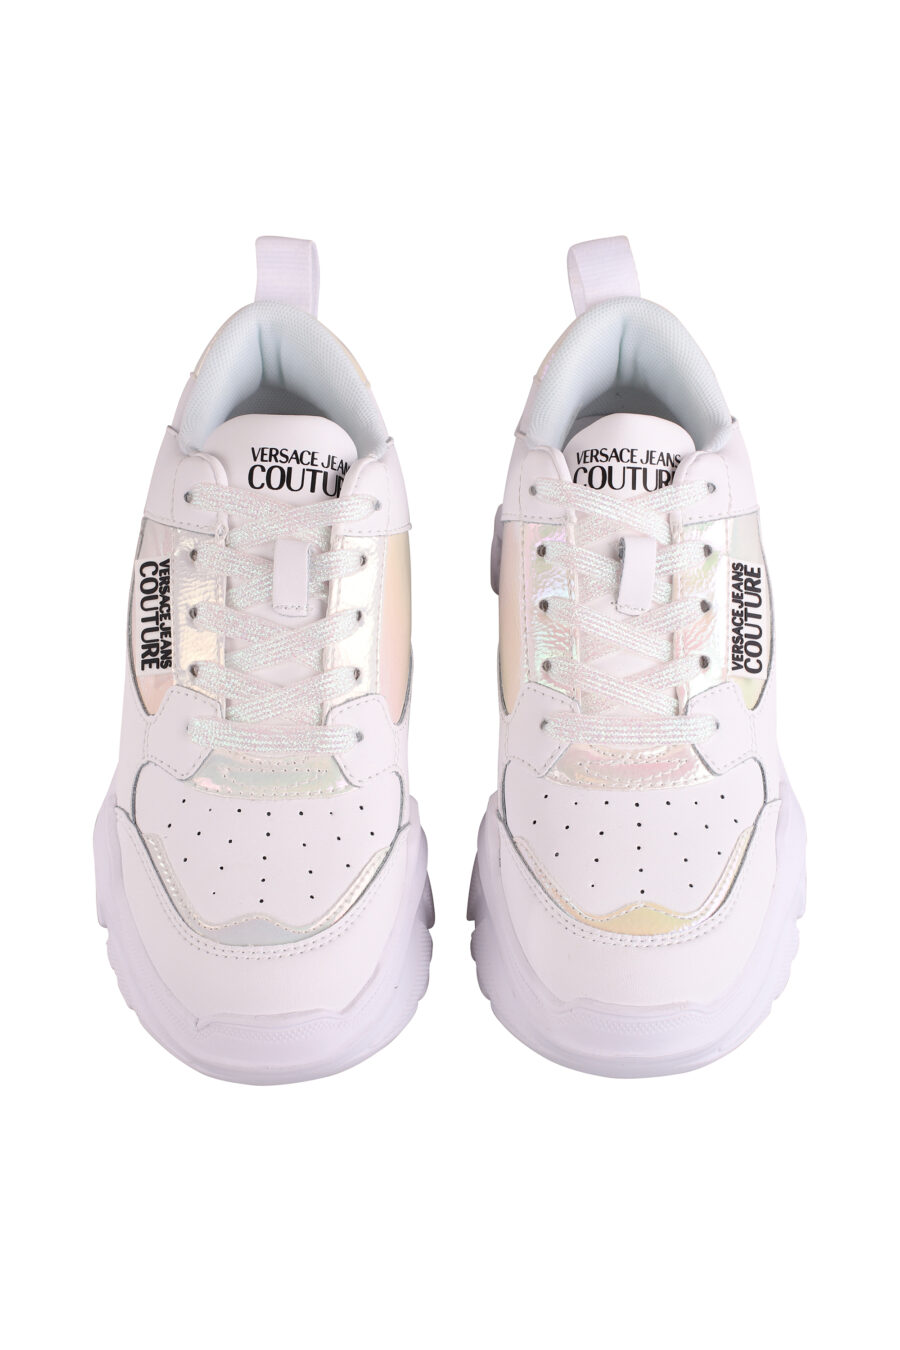 White trainers with hologram details and platform - IMG 9097